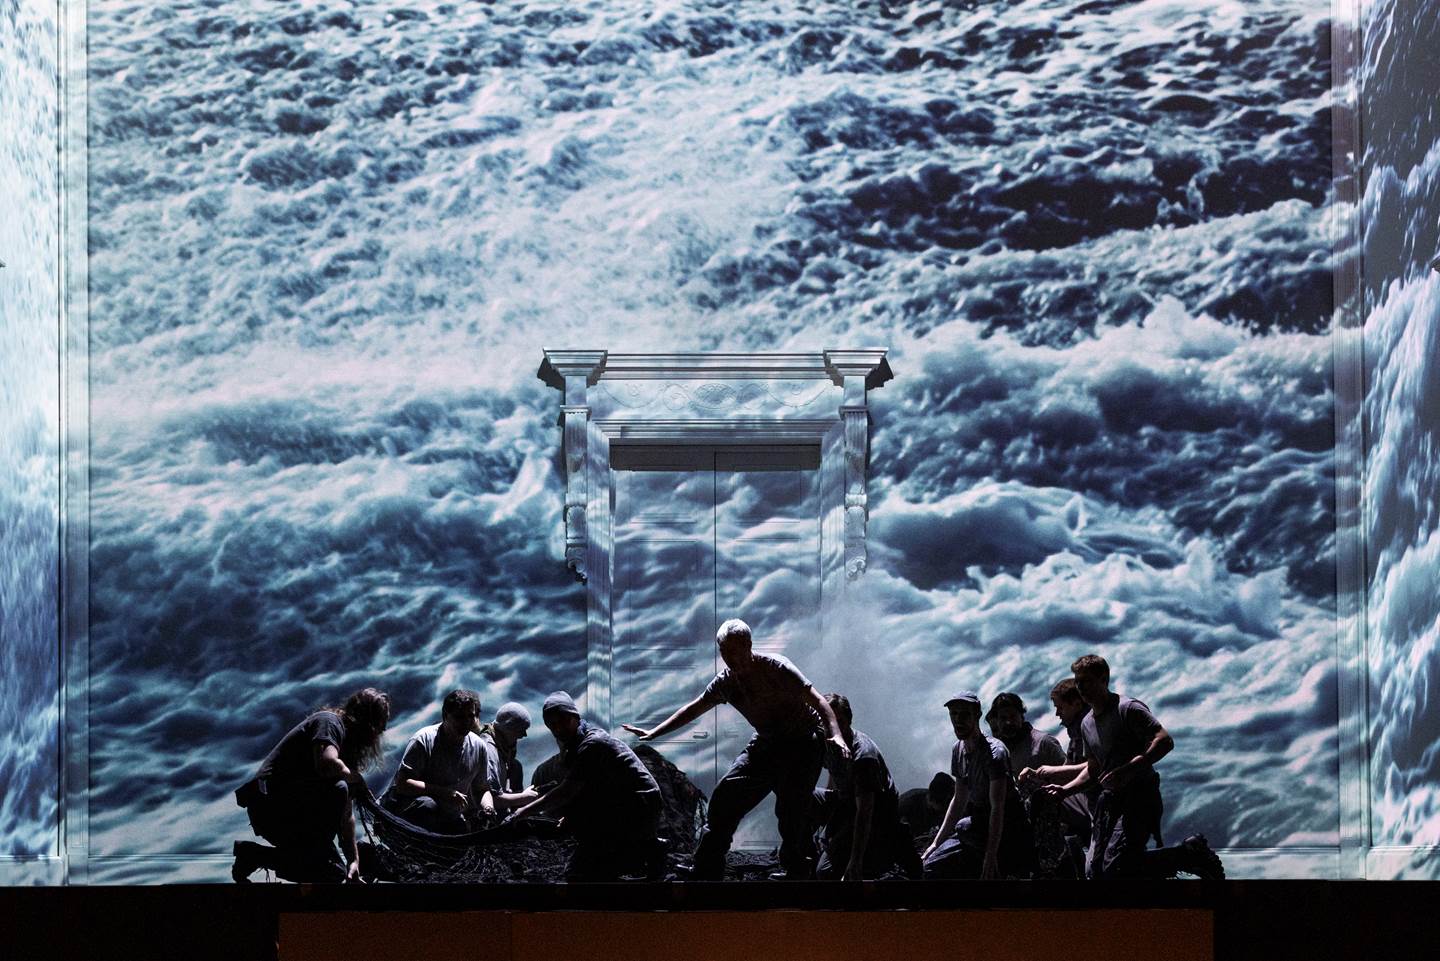 Silhouette&#39;s of several cast members on their knees with an image of ocean waves covering the wall behind them.